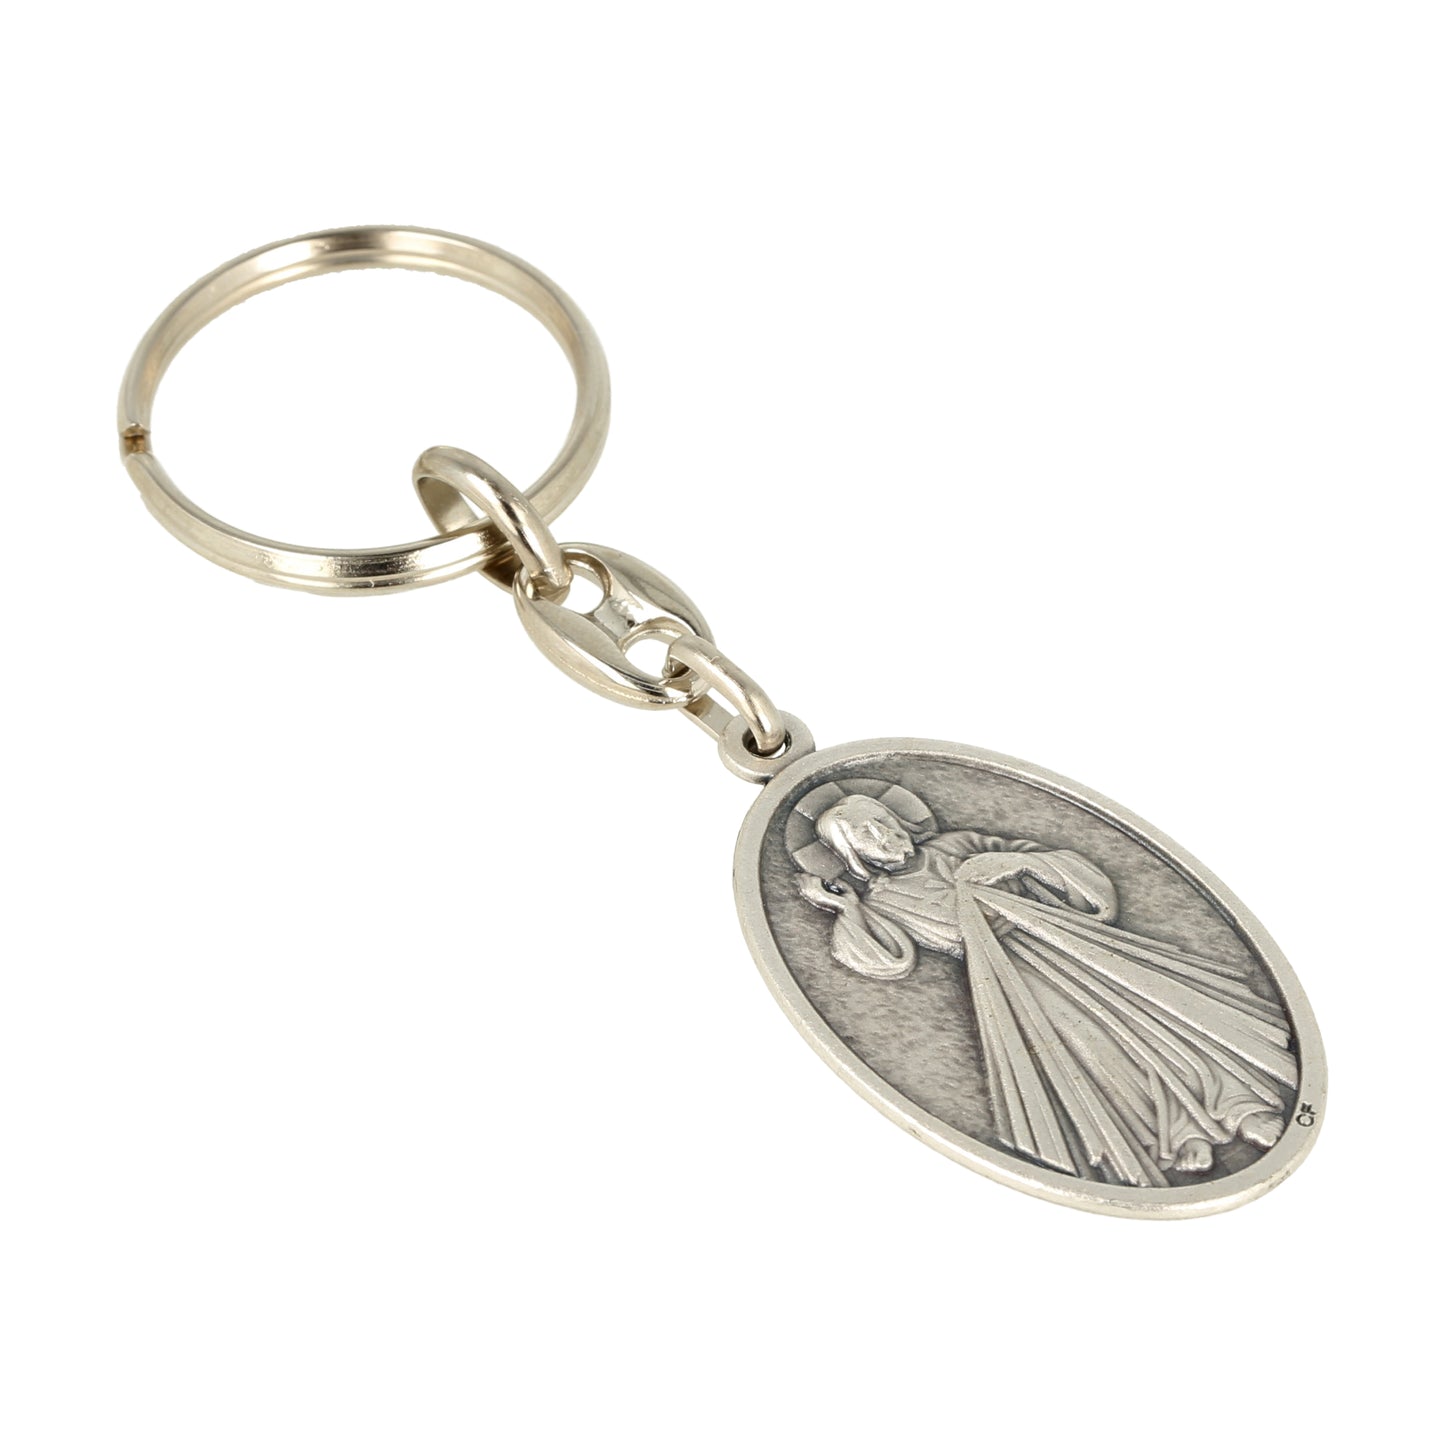 Keychain Virgin Fatima Merciful Jesus Oval. Souvenirs from Italy